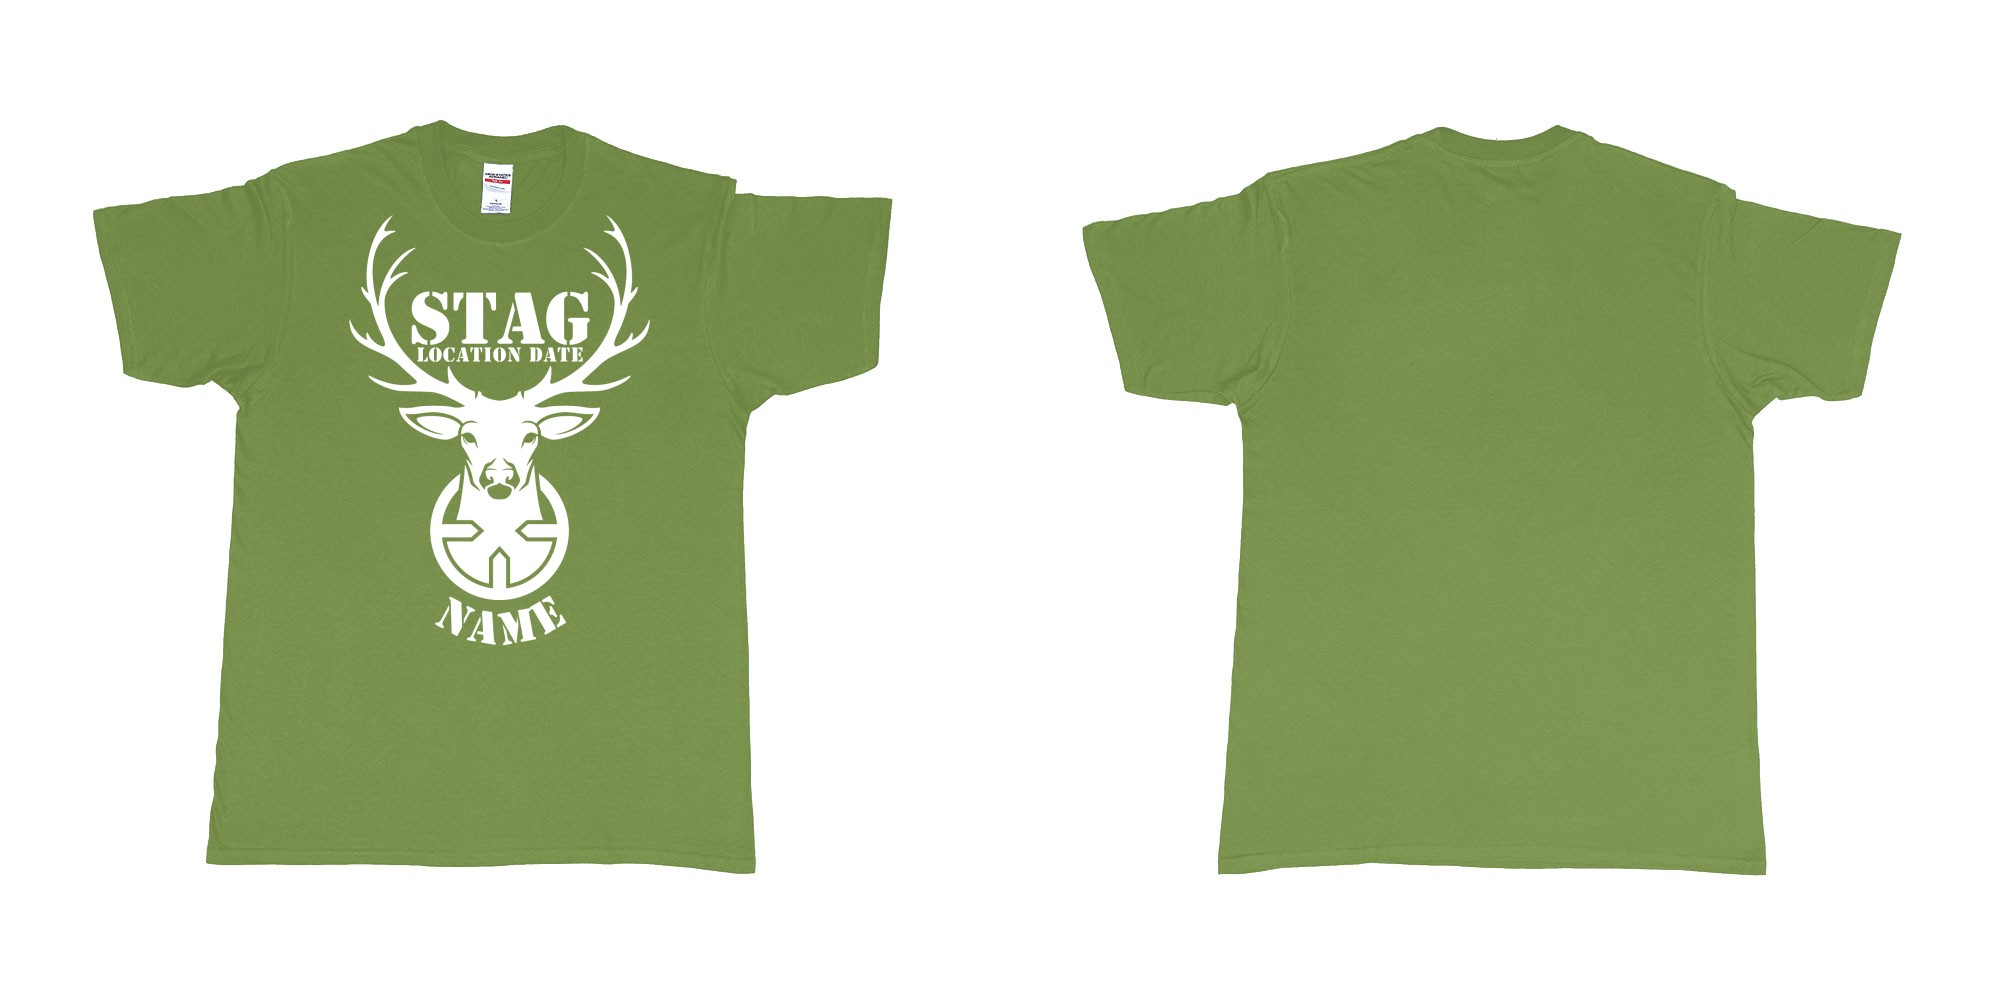 Custom tshirt design aiming for a stag custom tshirt print in fabric color military-green choice your own text made in Bali by The Pirate Way